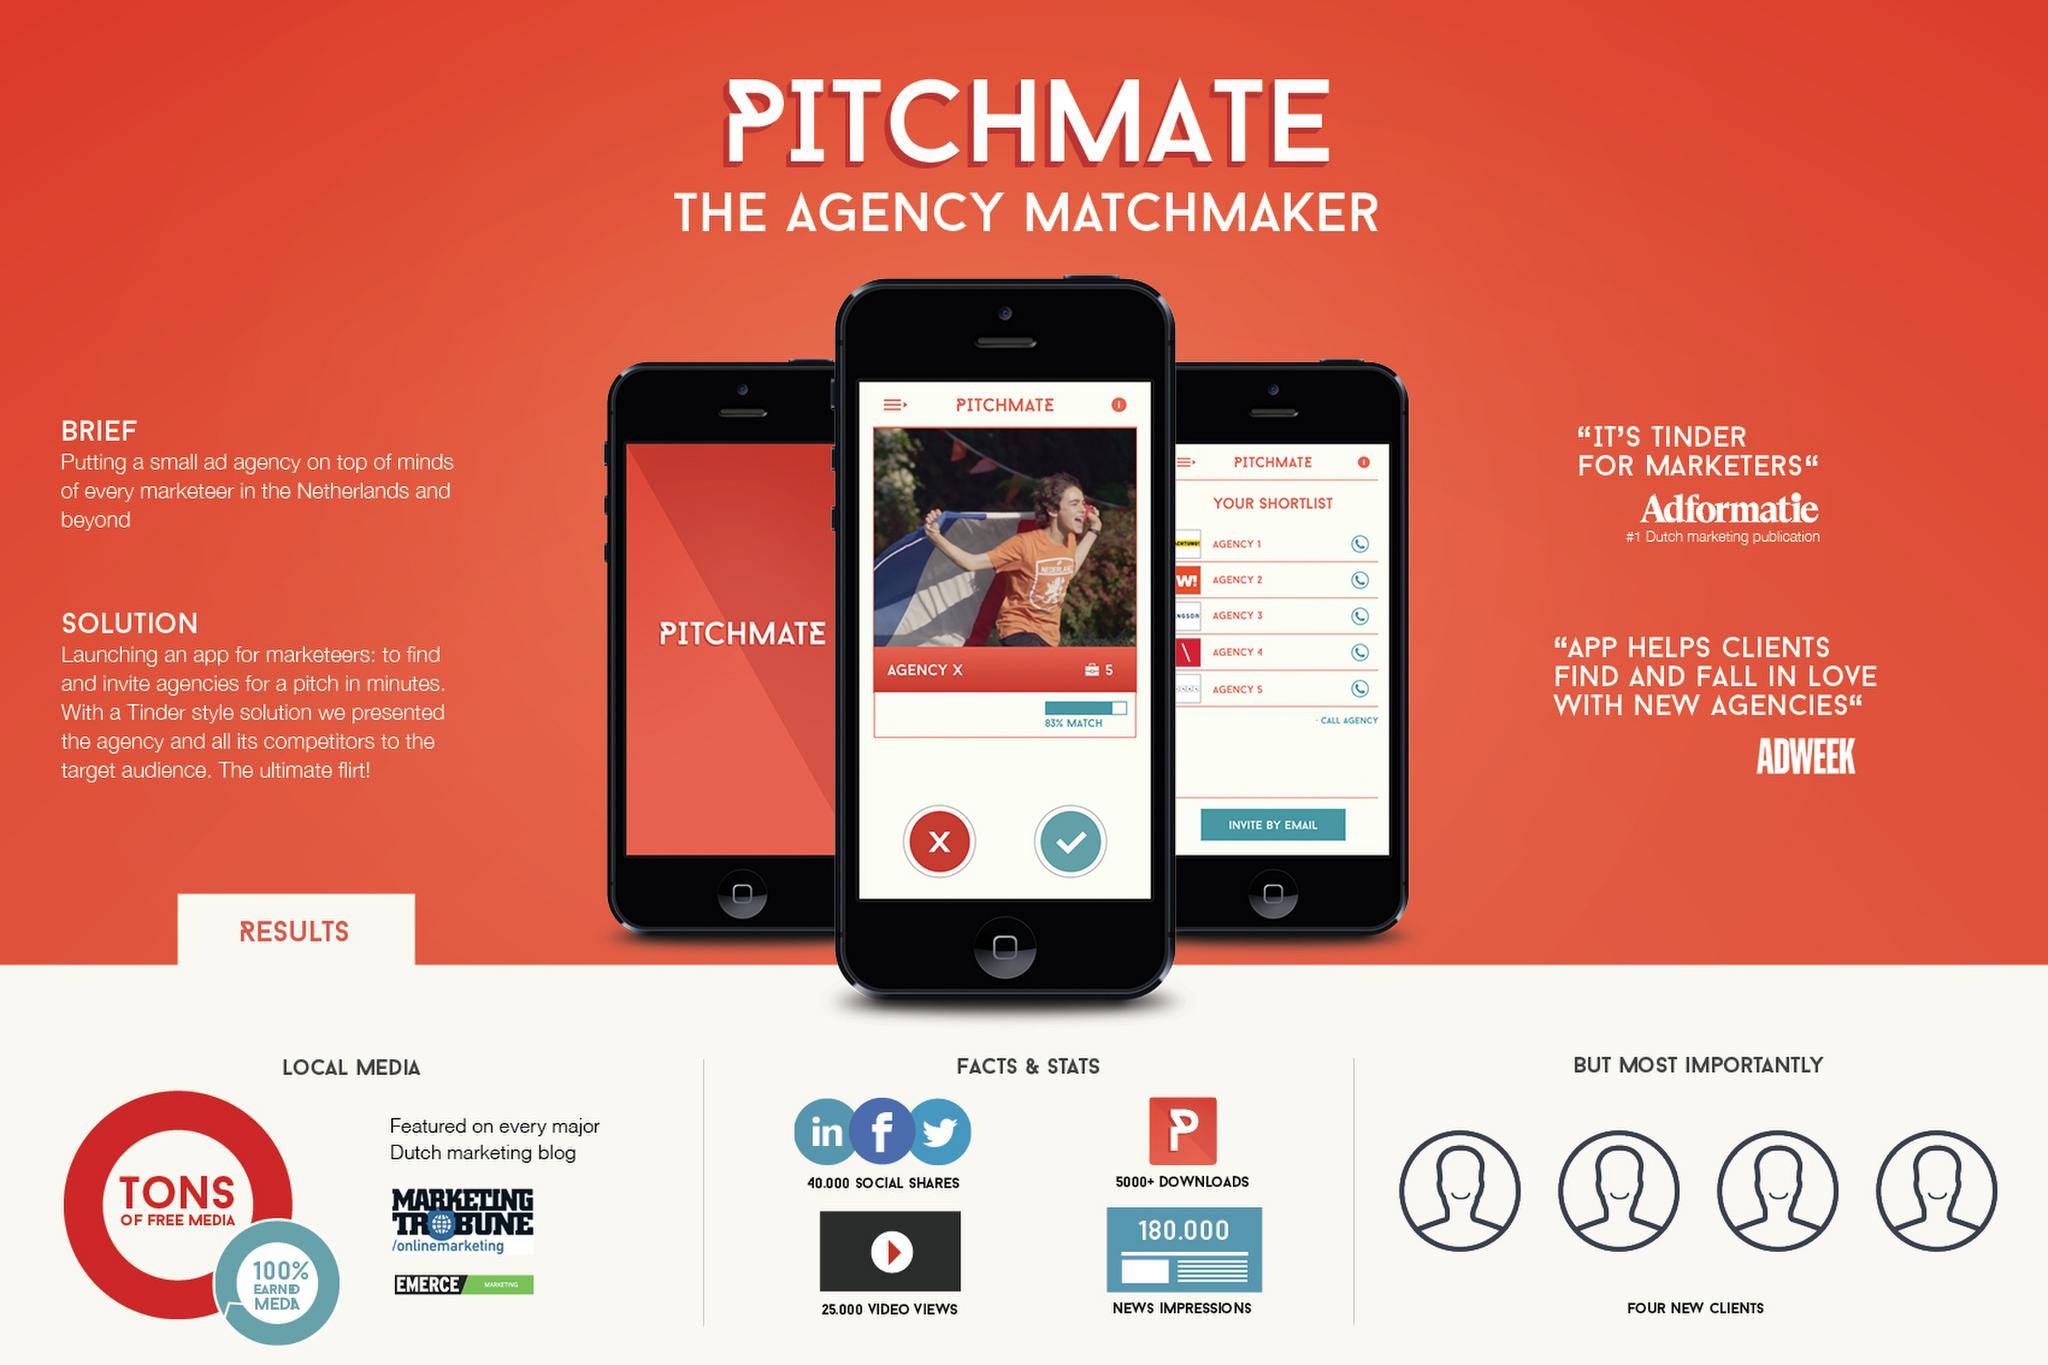 PITCHMATE